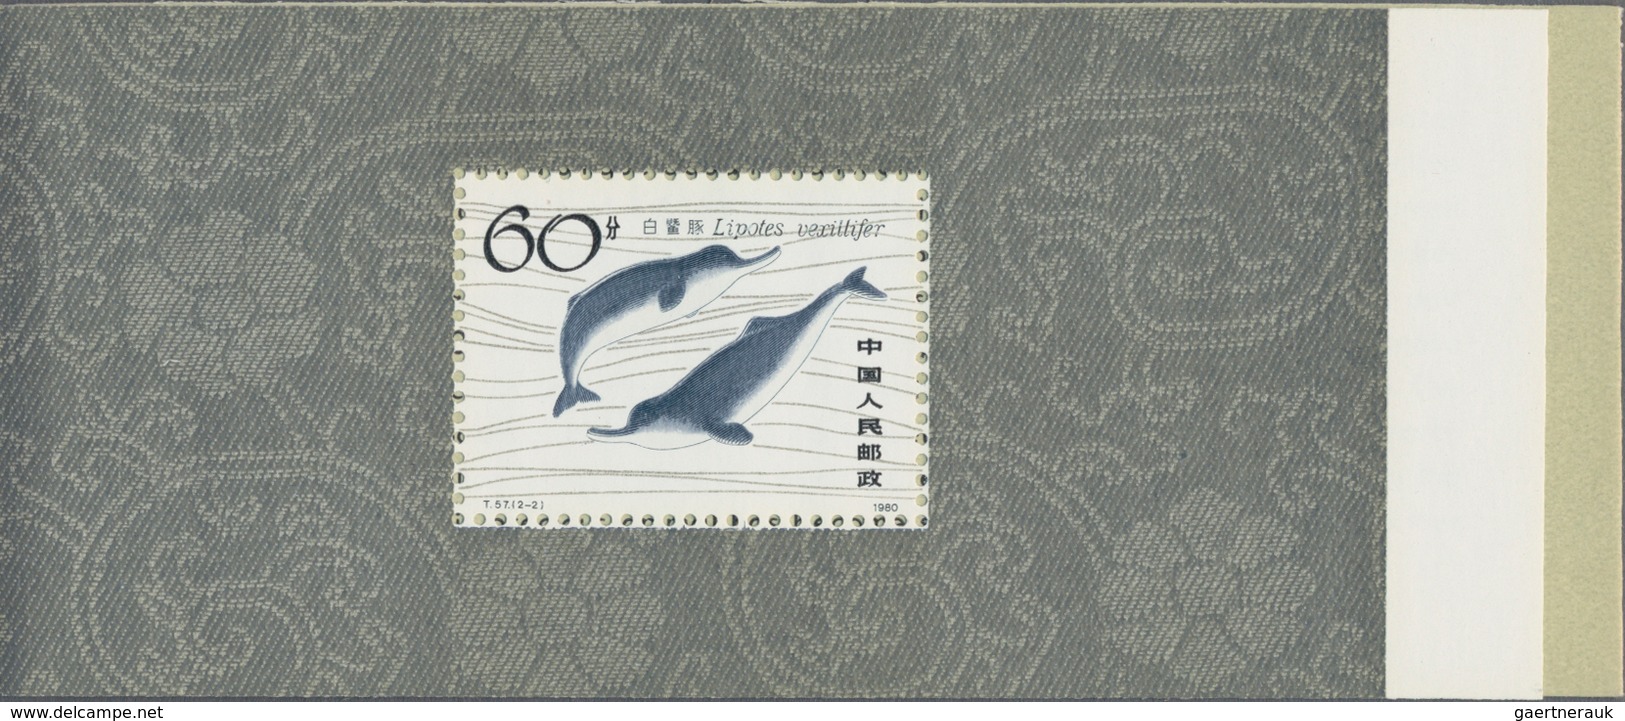 China - Volksrepublik: 1981, 4 SB2 Chinese River Dolphins Booklet Panes (Michel €440). - Covers & Documents